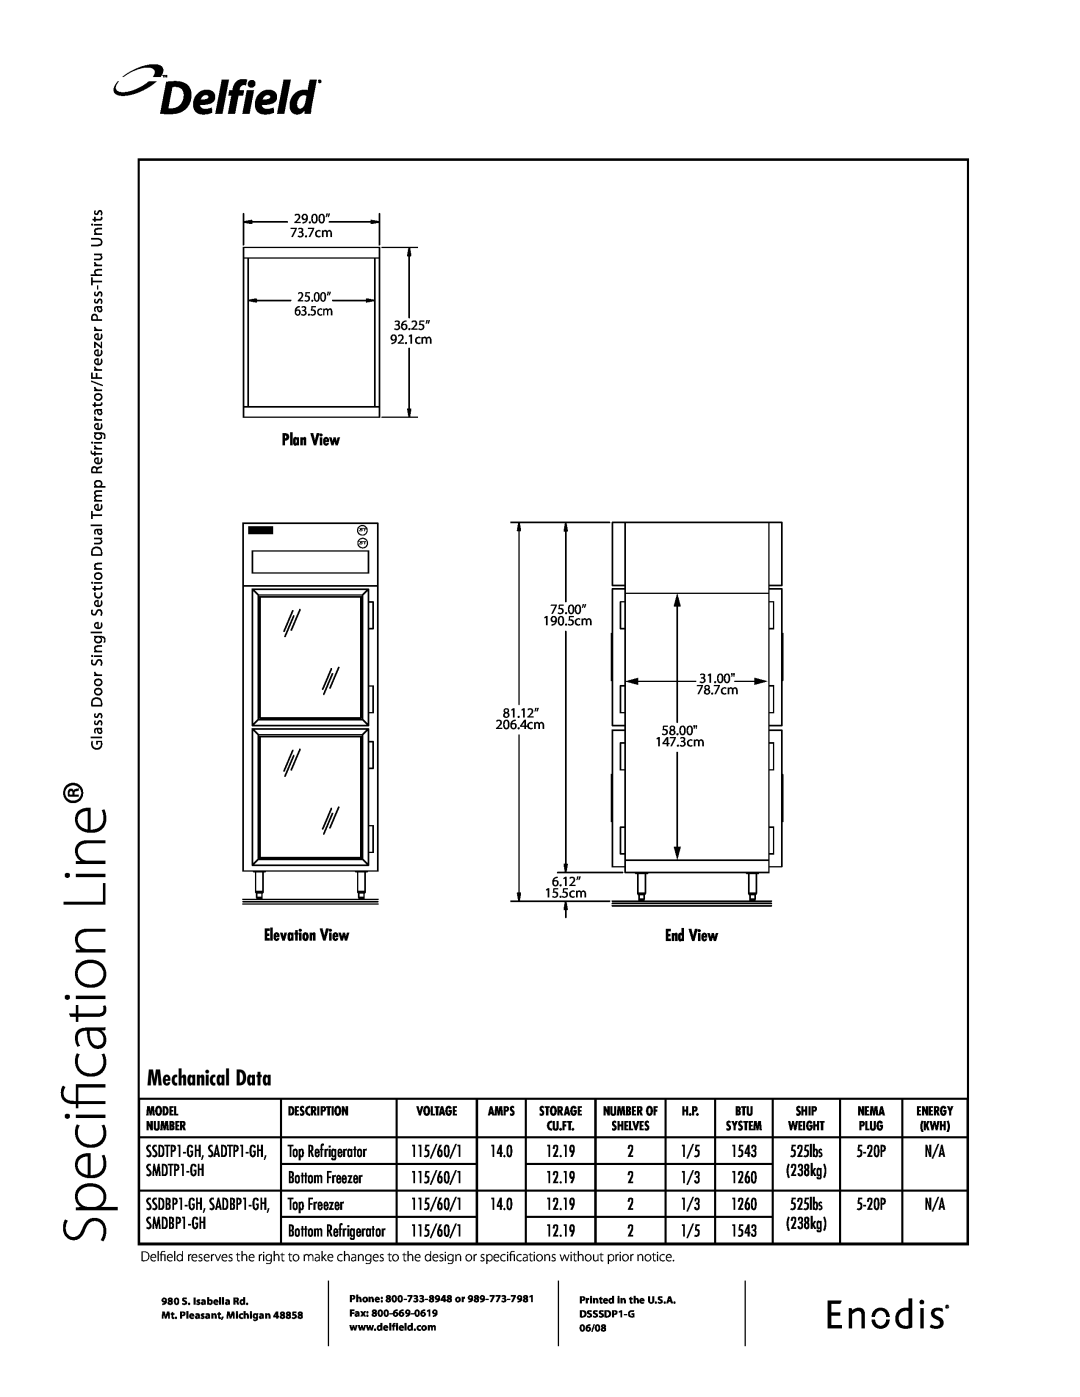 Delfield SSDP1-GH specifications Specification, Delfield, Mechanical Data, Plan View, Elevation View, End View 